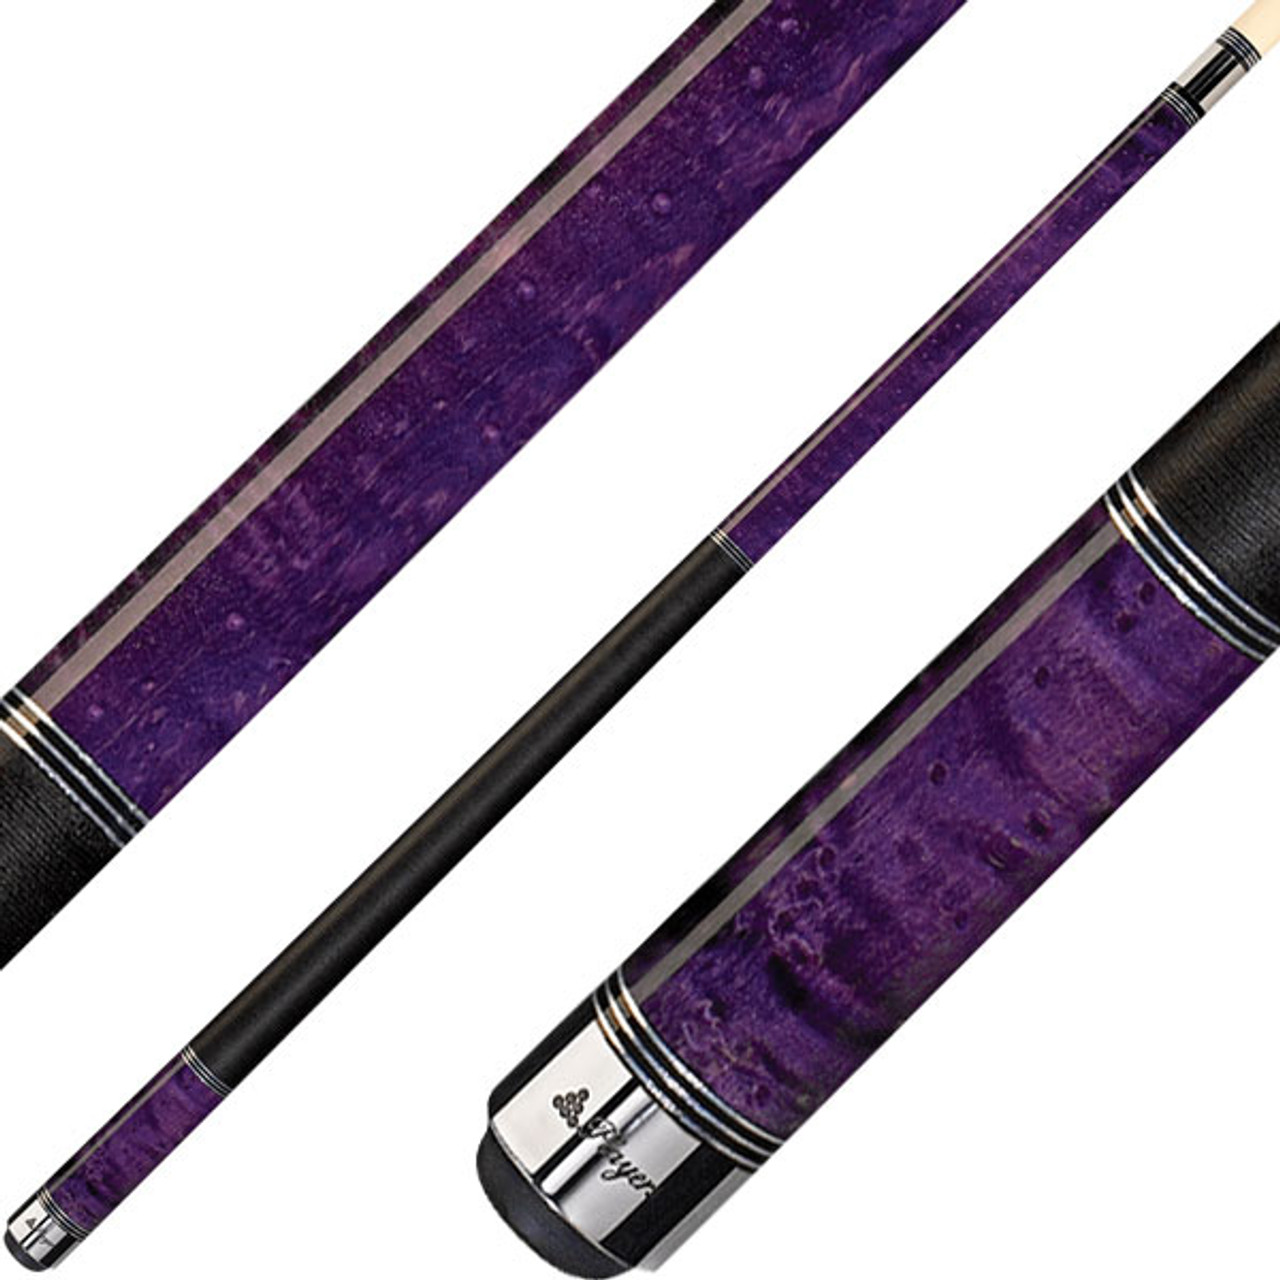 C965 FREE CASE & JOINT CAPS Plum Stain NEW Players C-965 Pool Cue 